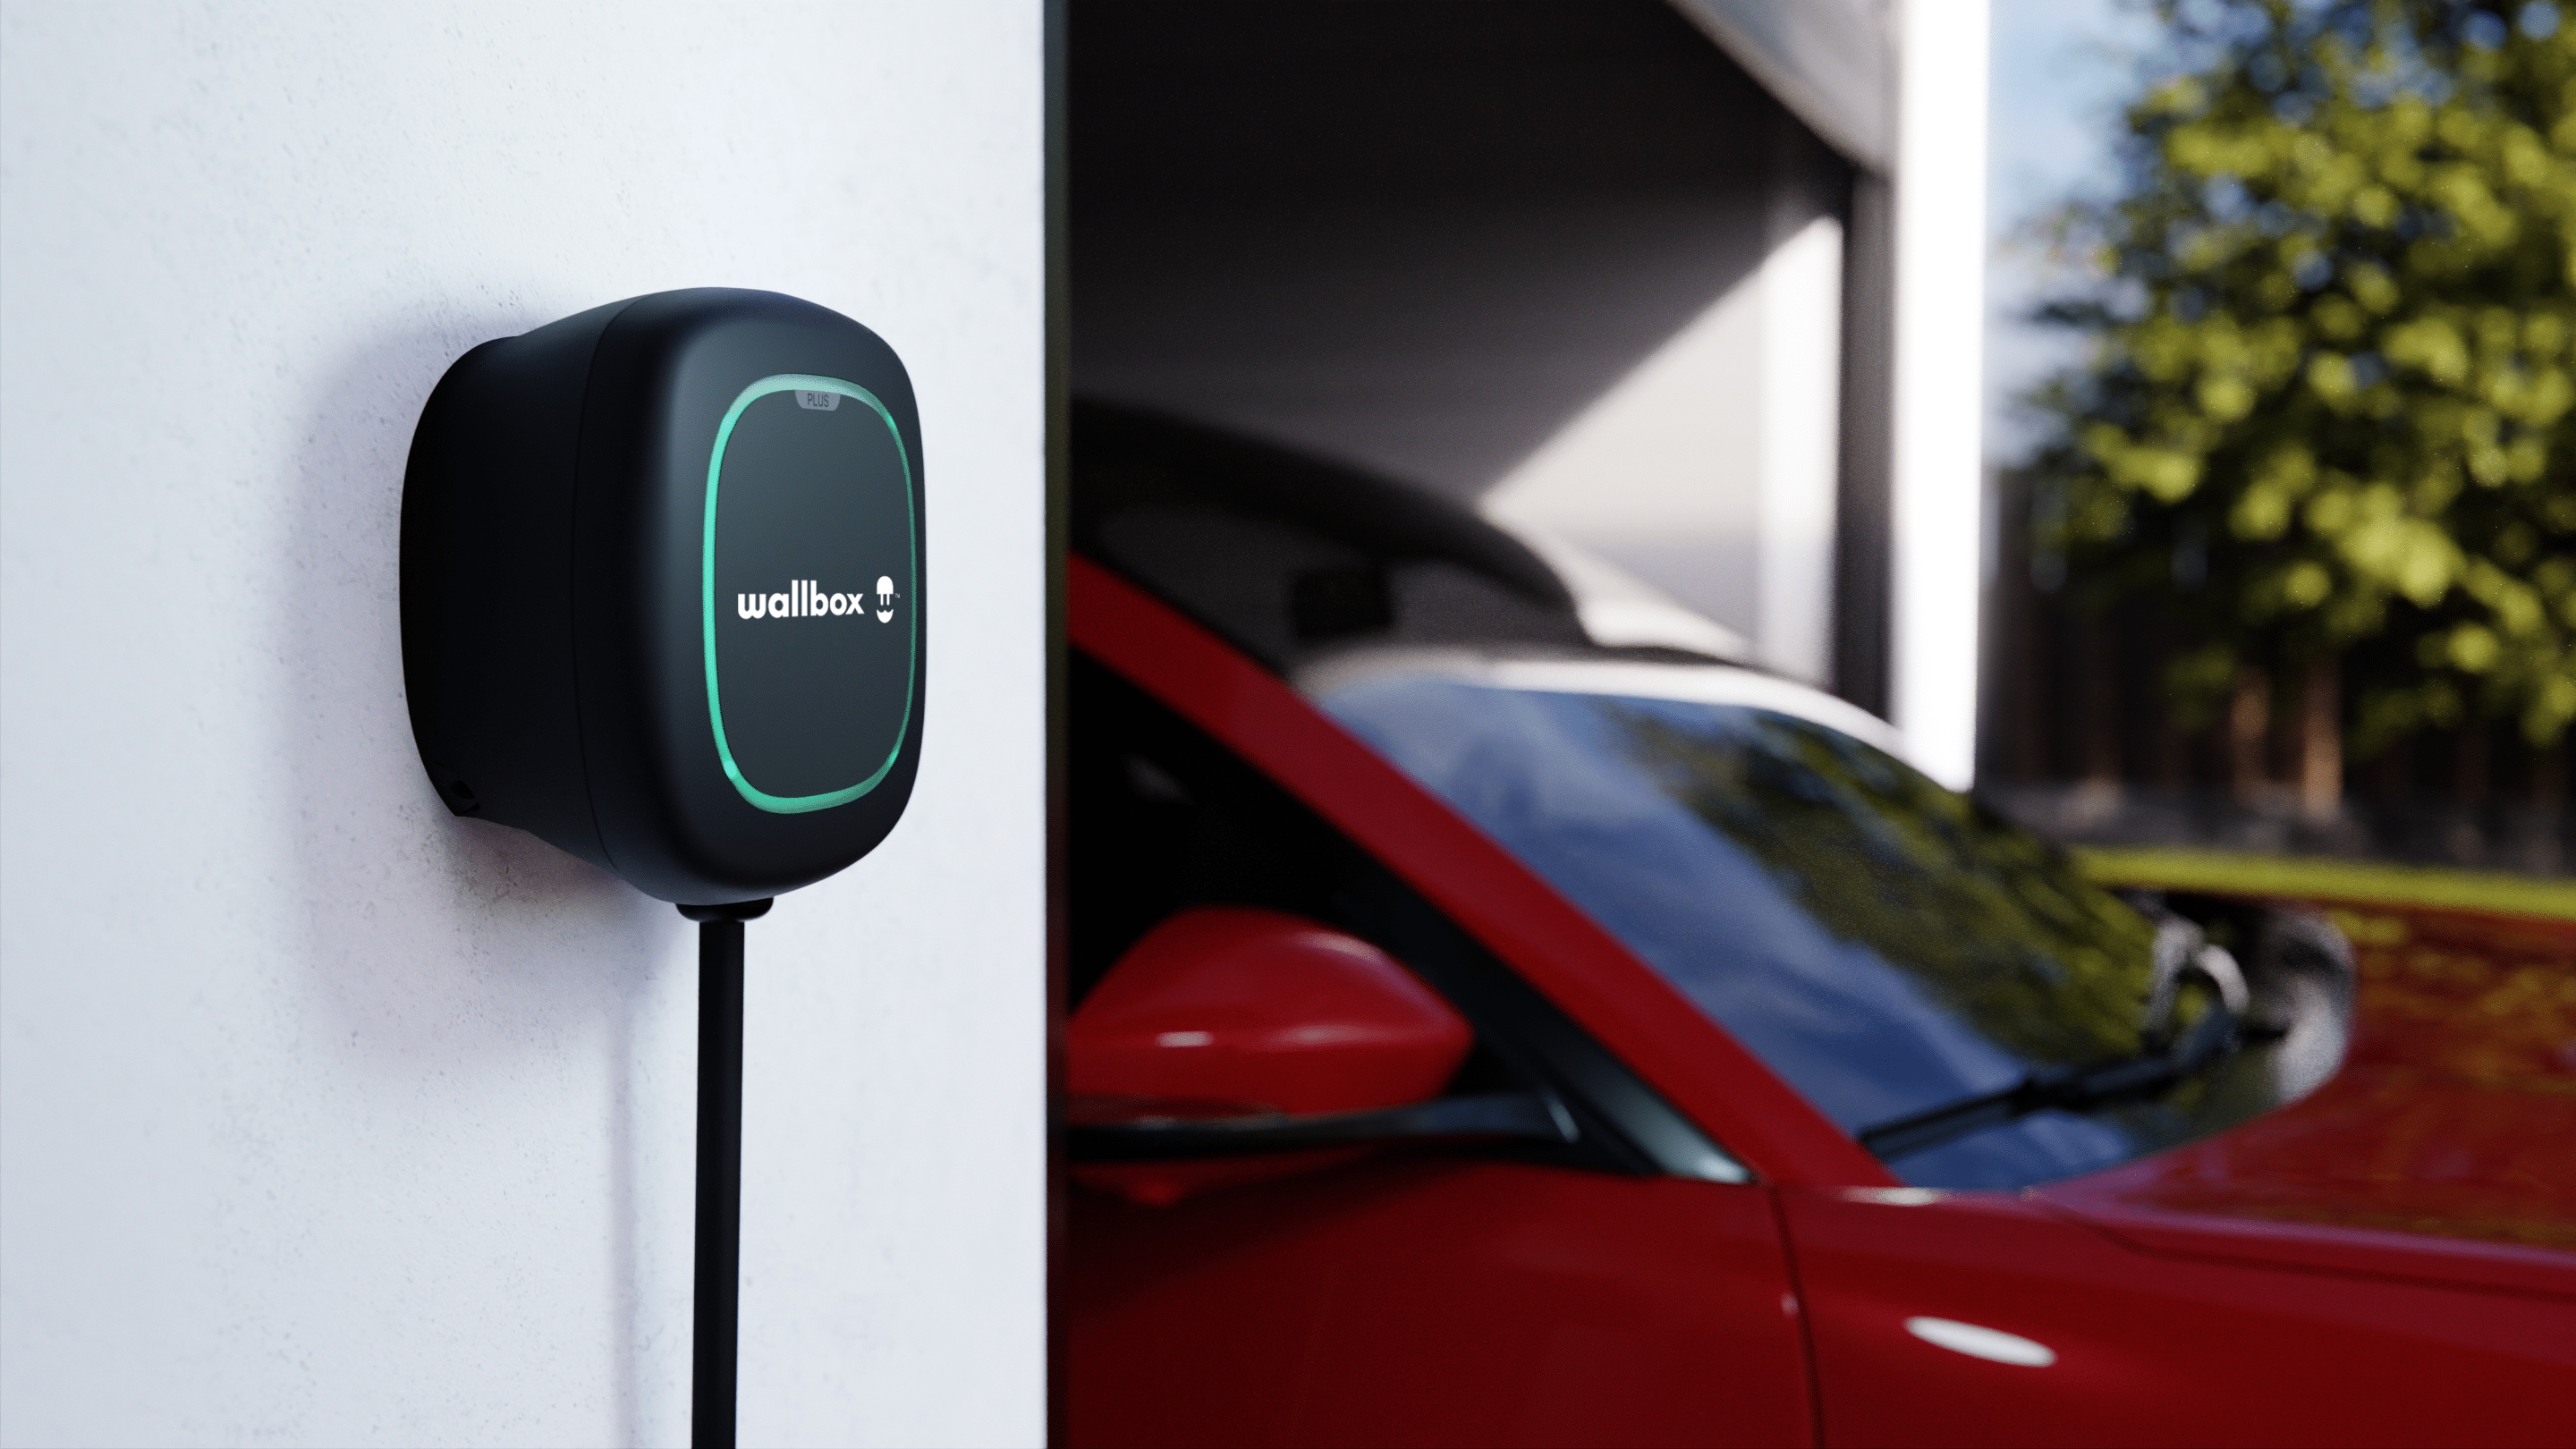 Wallbox Pulsar Plus Level 48 Amps/ EV Electric Vehicle Charging Station  with 25-ft Cable in the Electric Car Chargers department at